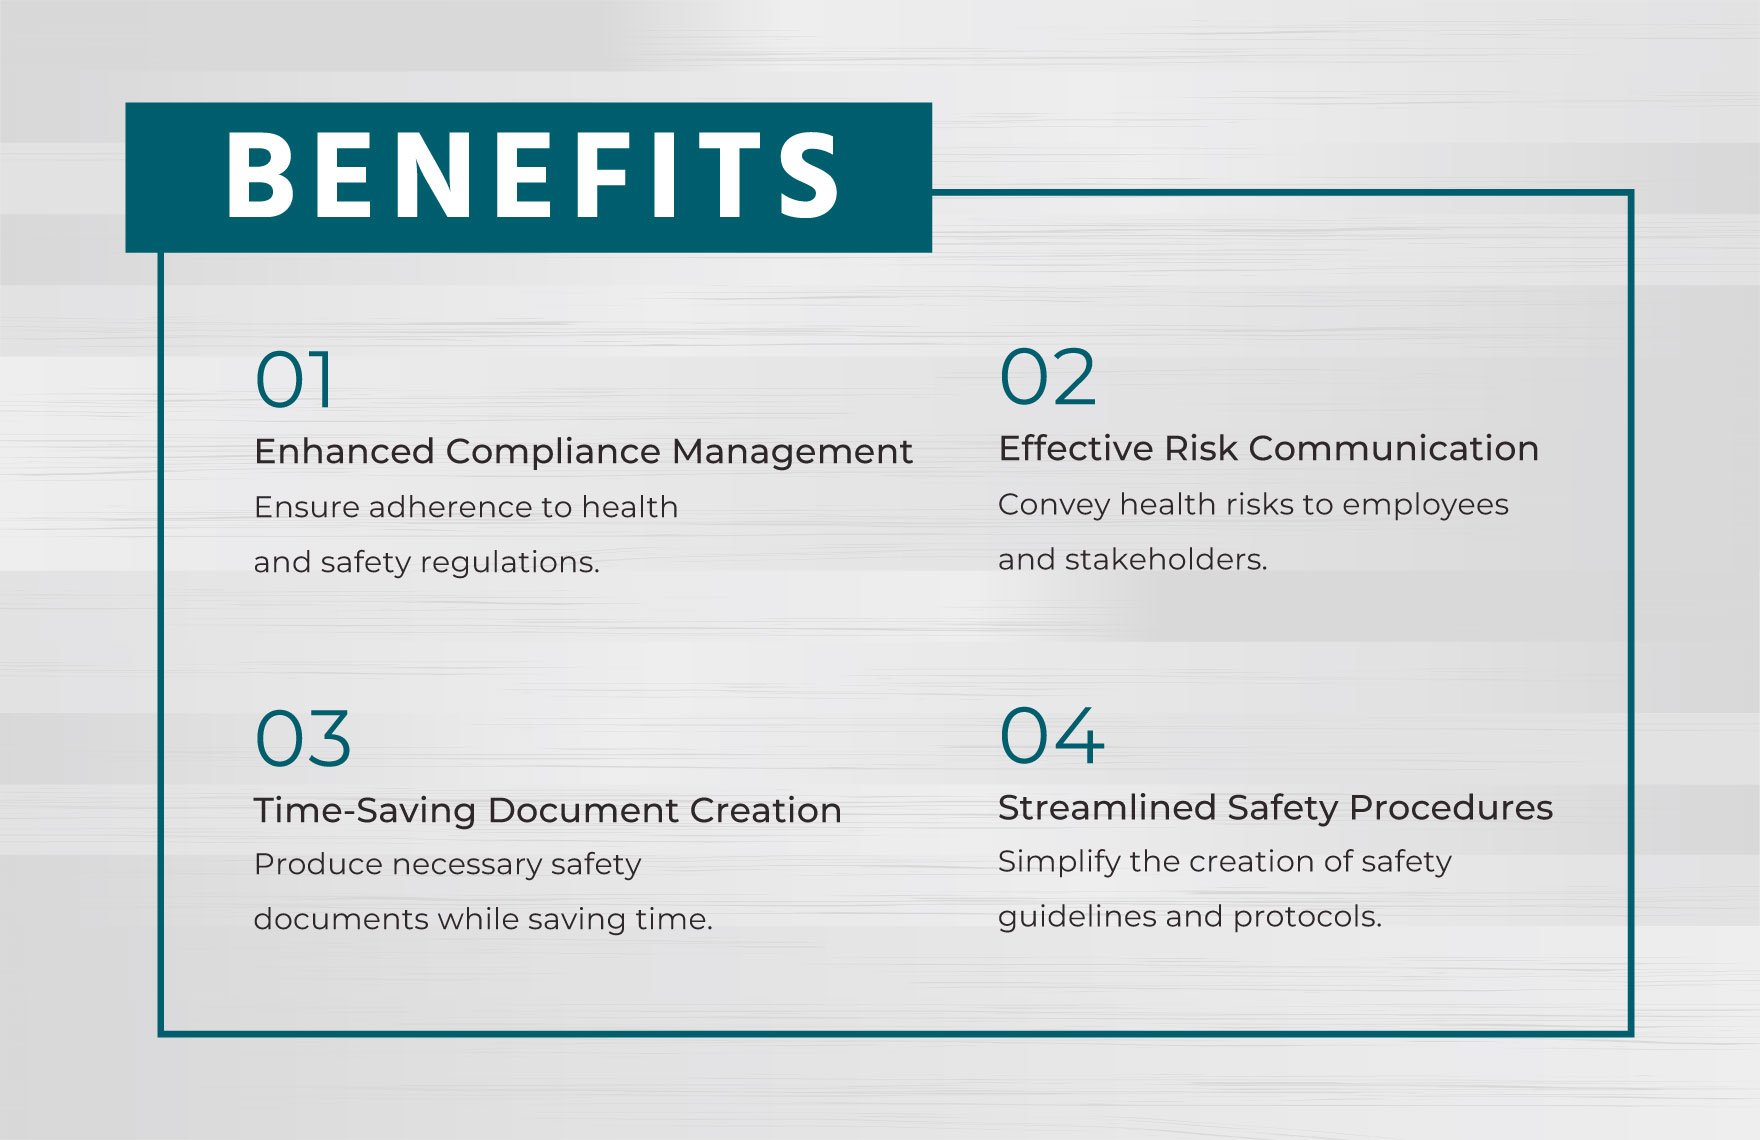 Health & Safety Compliance Risk Analysis Template